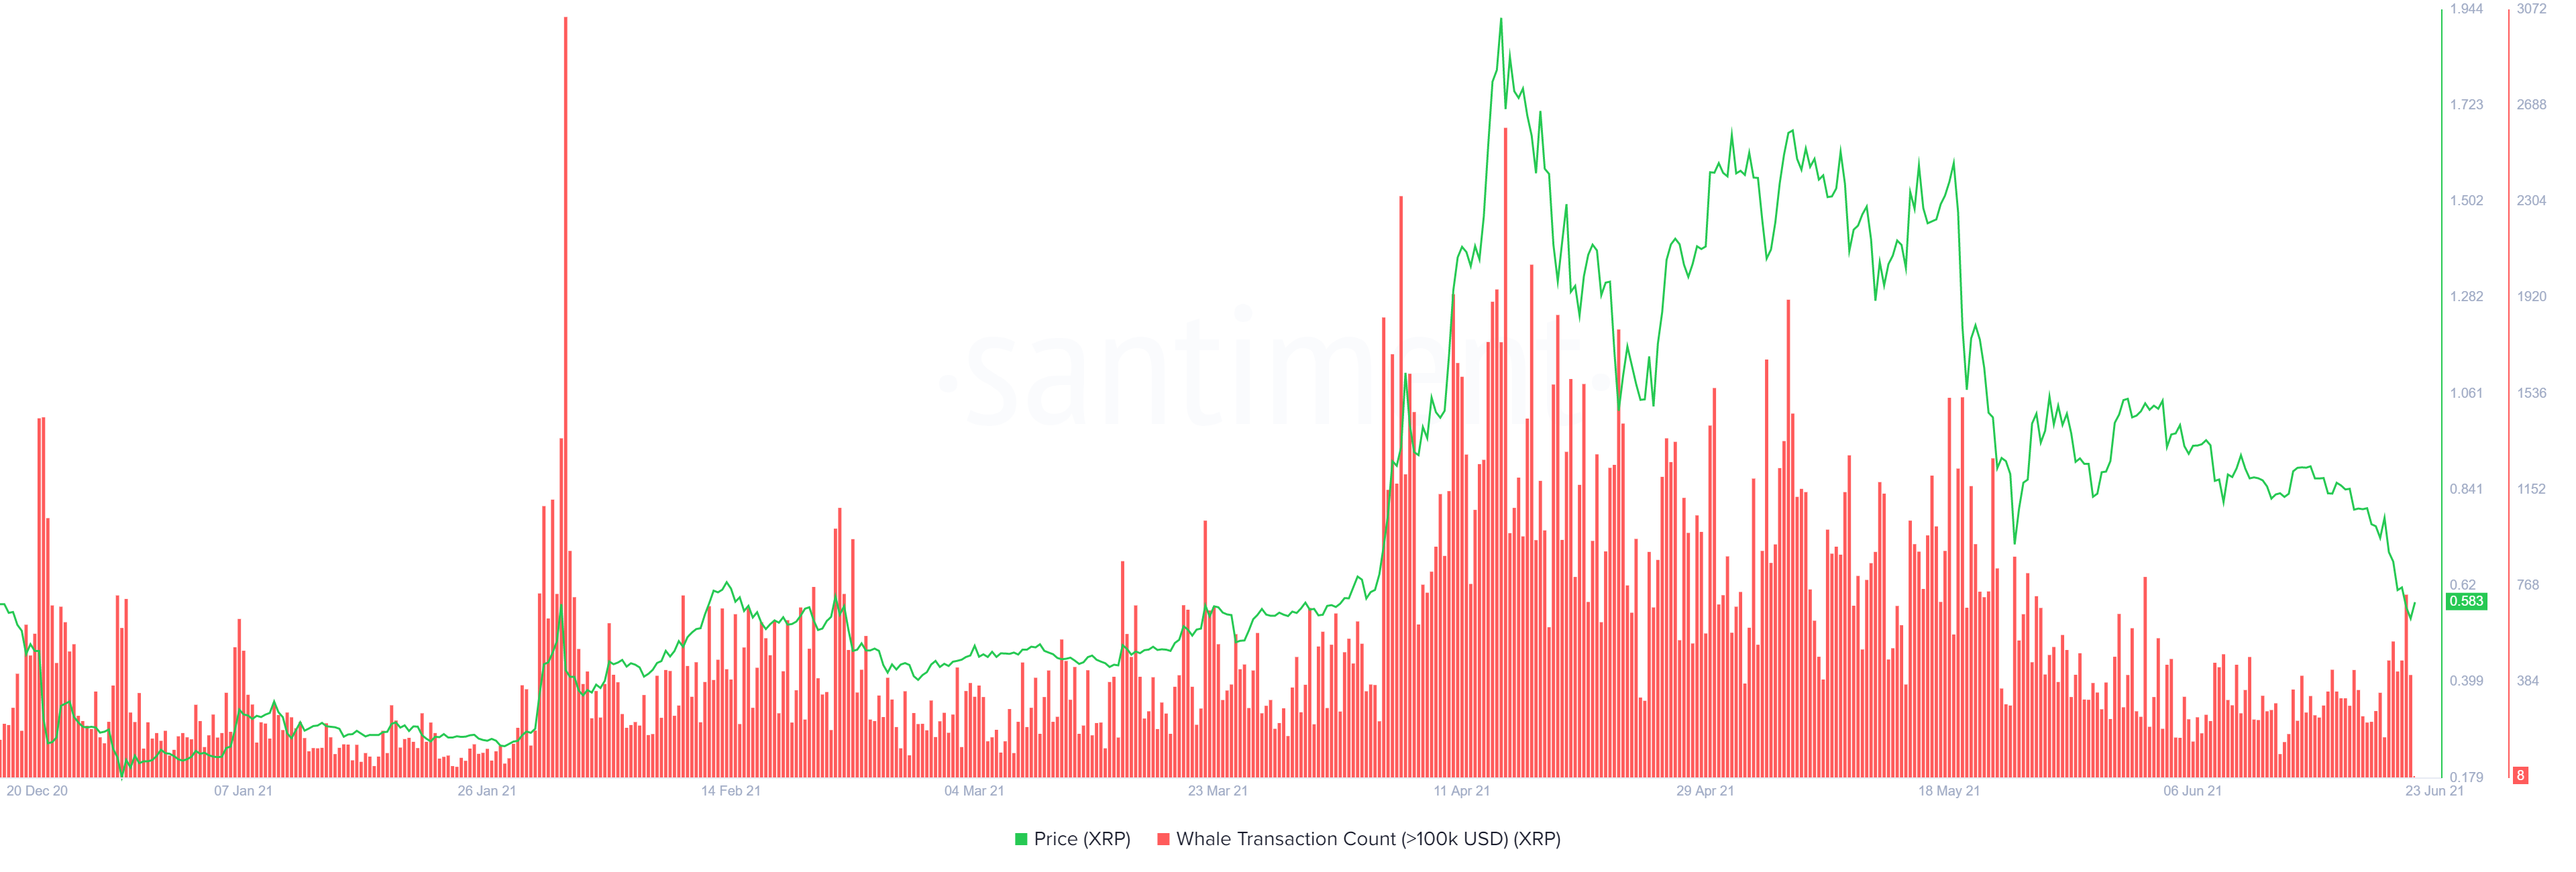 XRP large transactions chart